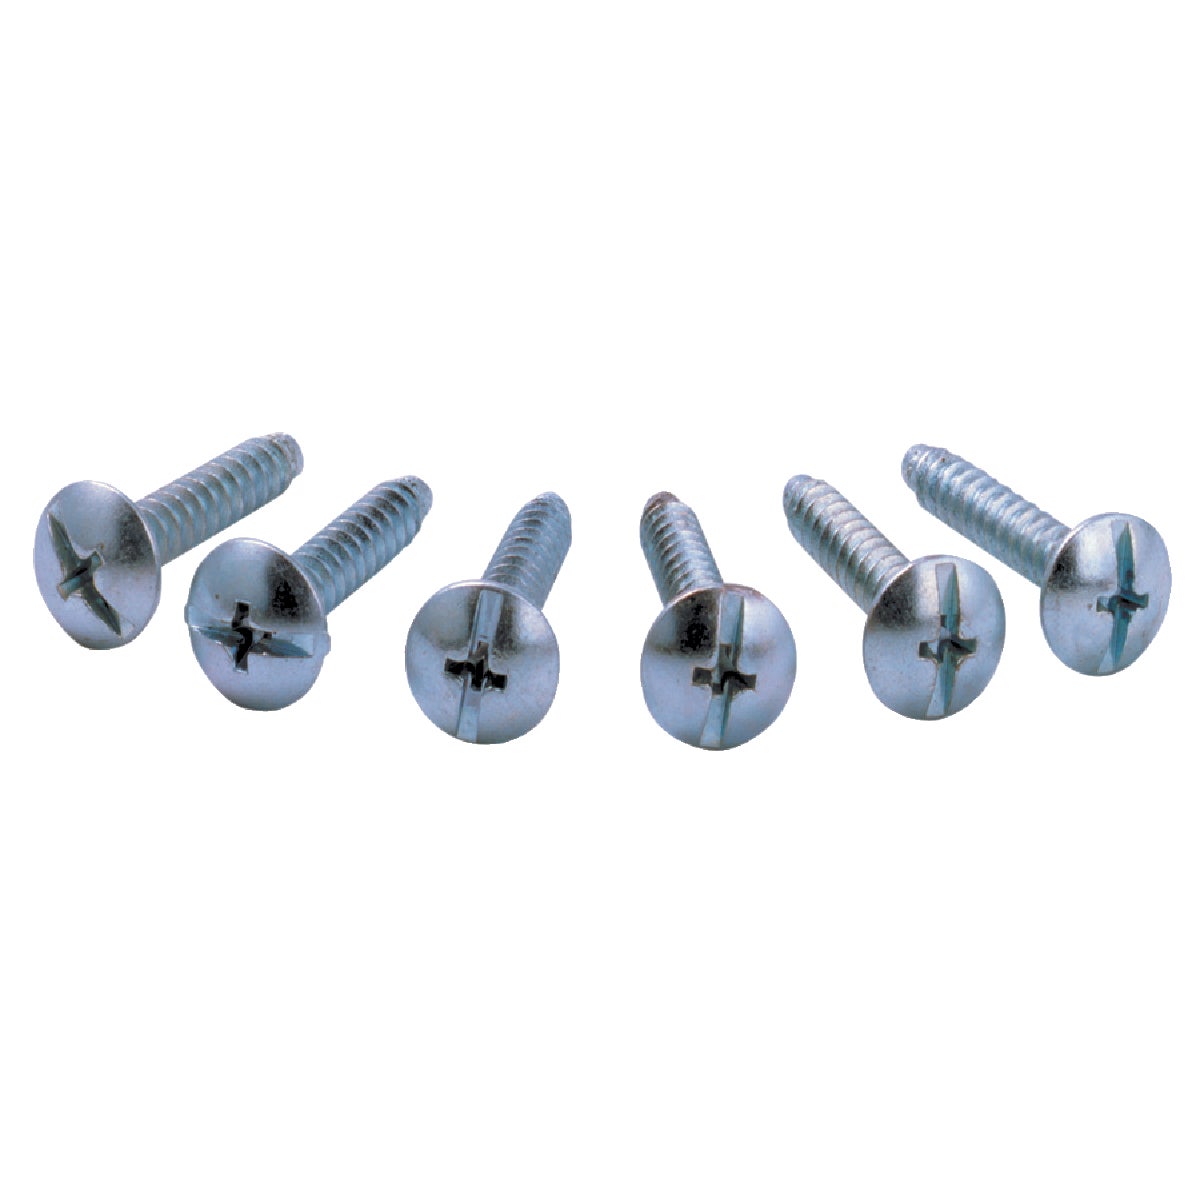 Eaton Load Center Replacement Cover Screws (6-Pack)